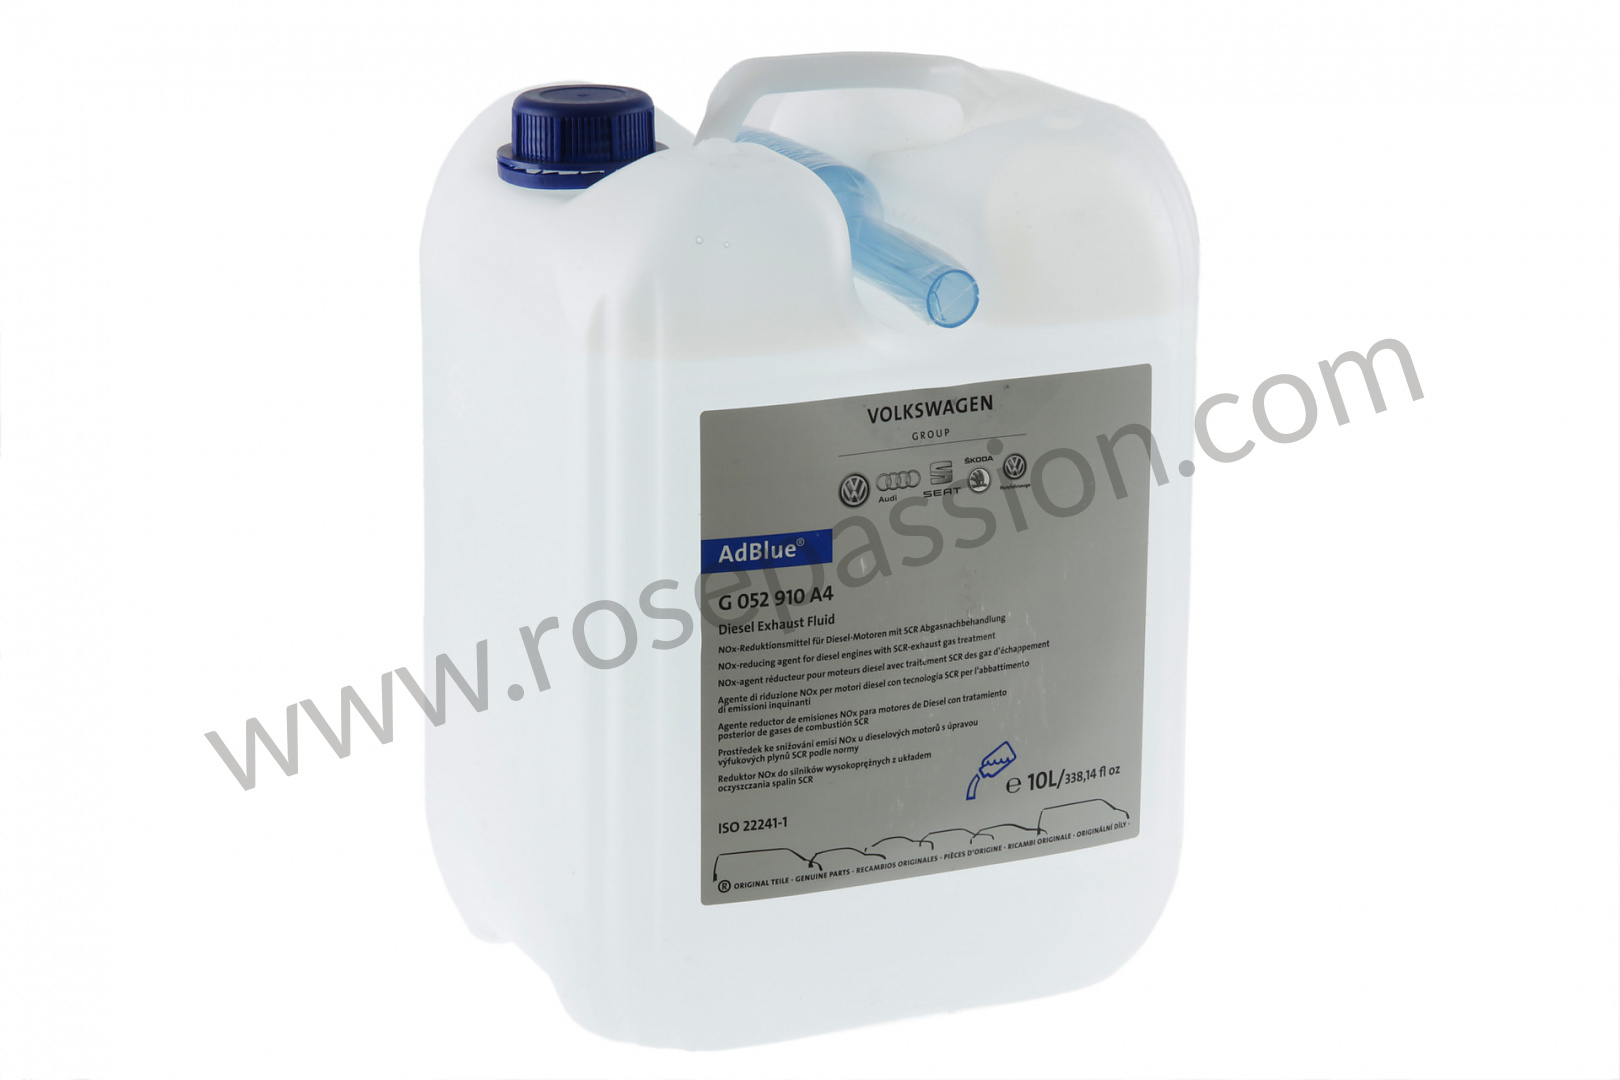 P184489 - PAF052910A - Adblue urea solution container only to use with  special tools - 10 LITRES (95811351010) for Porsche